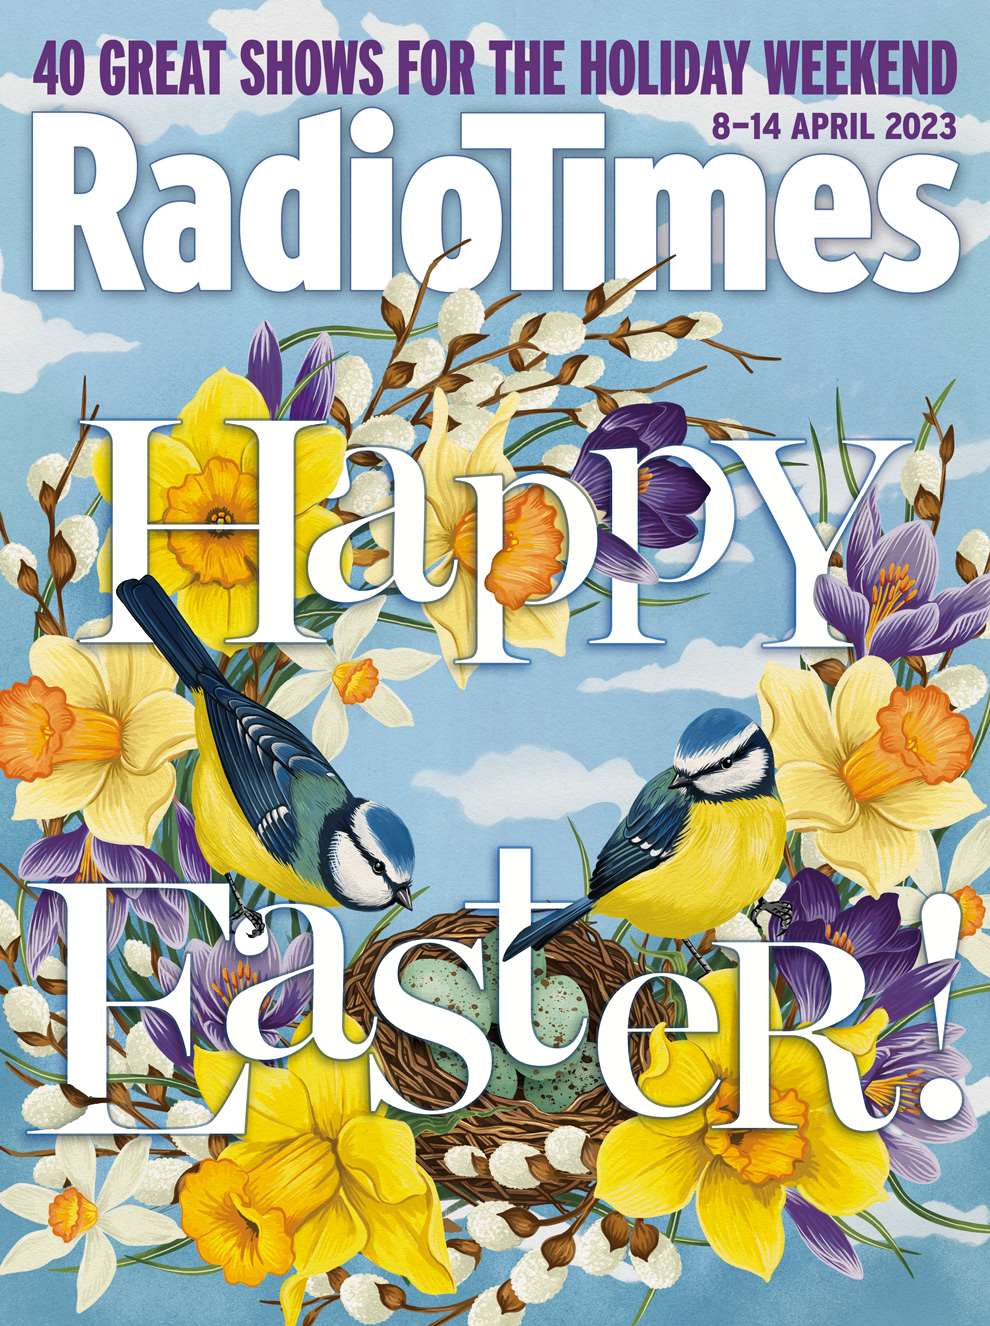 Charlotte Day, Charlotte Day's cover for the Radio Times magazine, Easter edition April 2023.